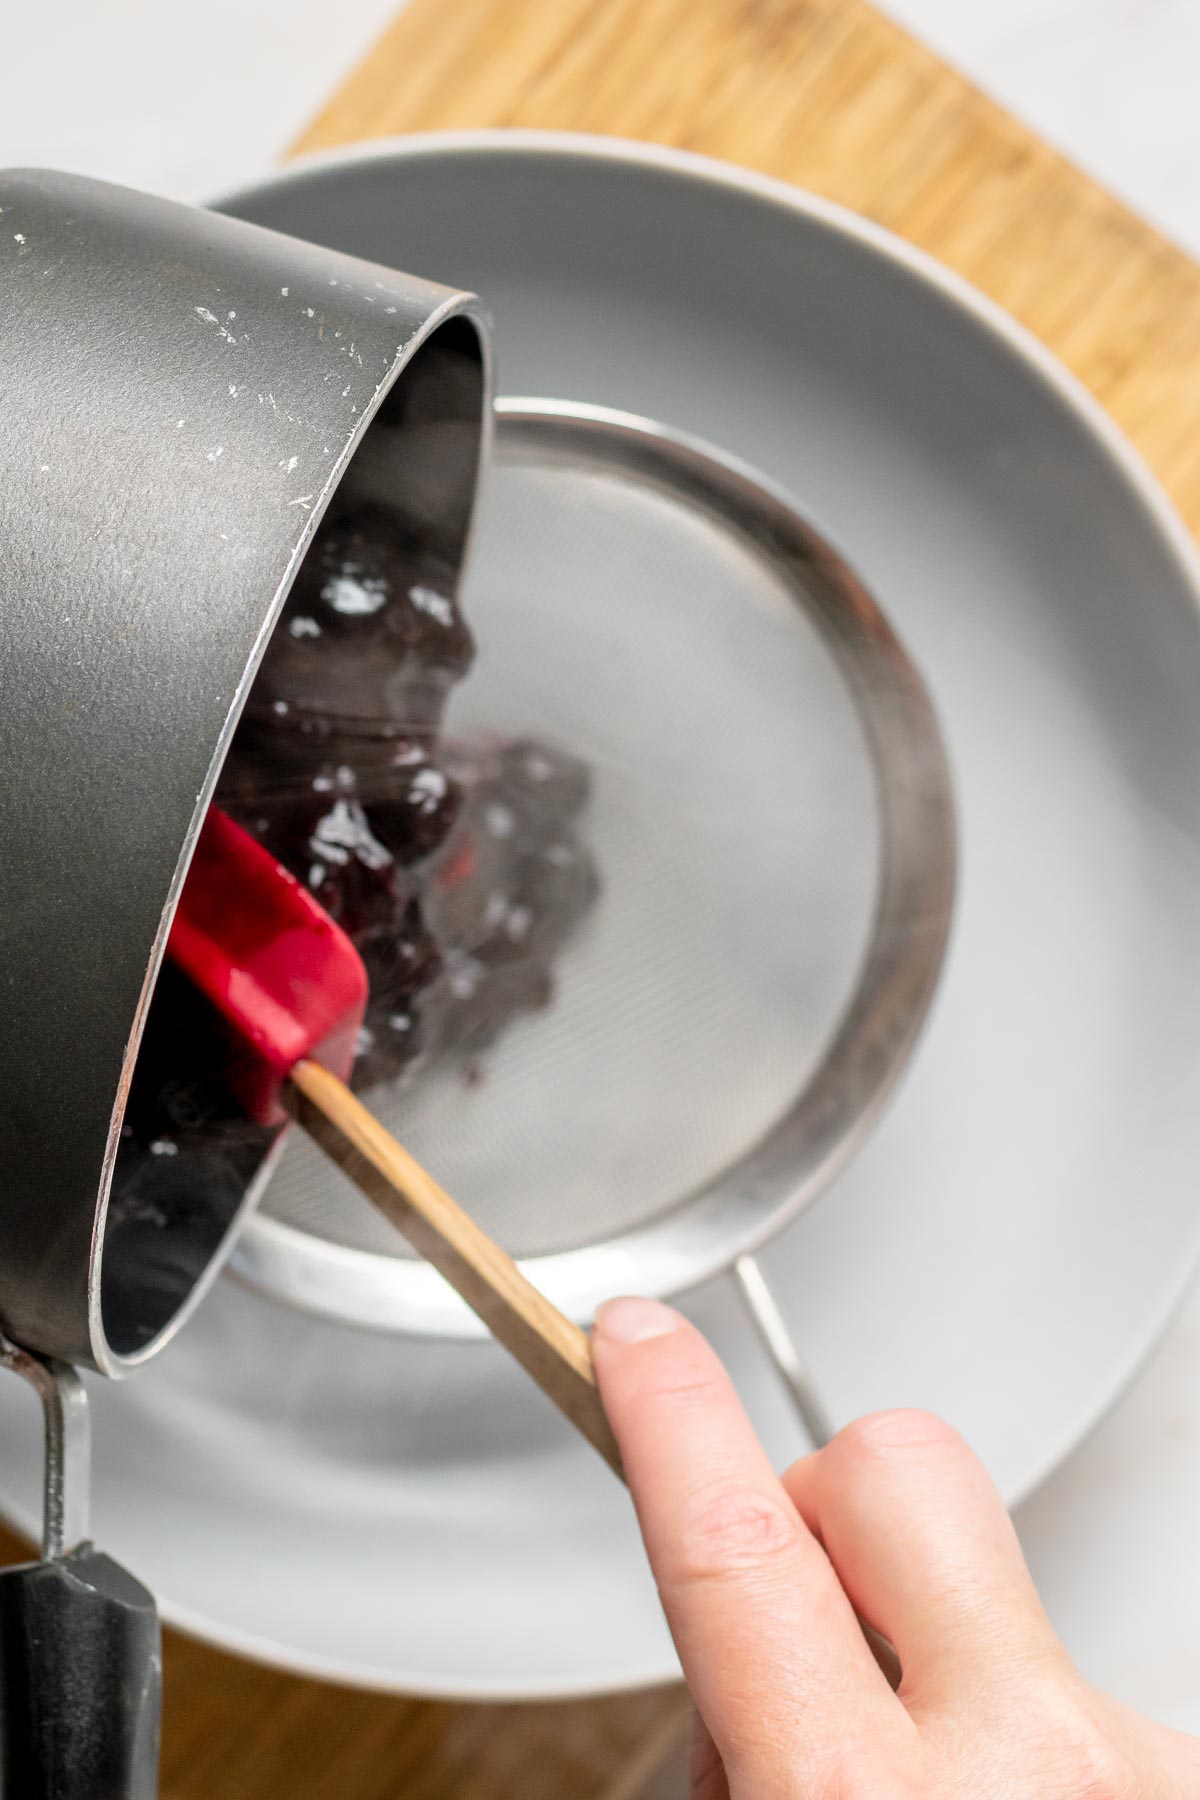 Cooked blueberries being poured through a sieve.